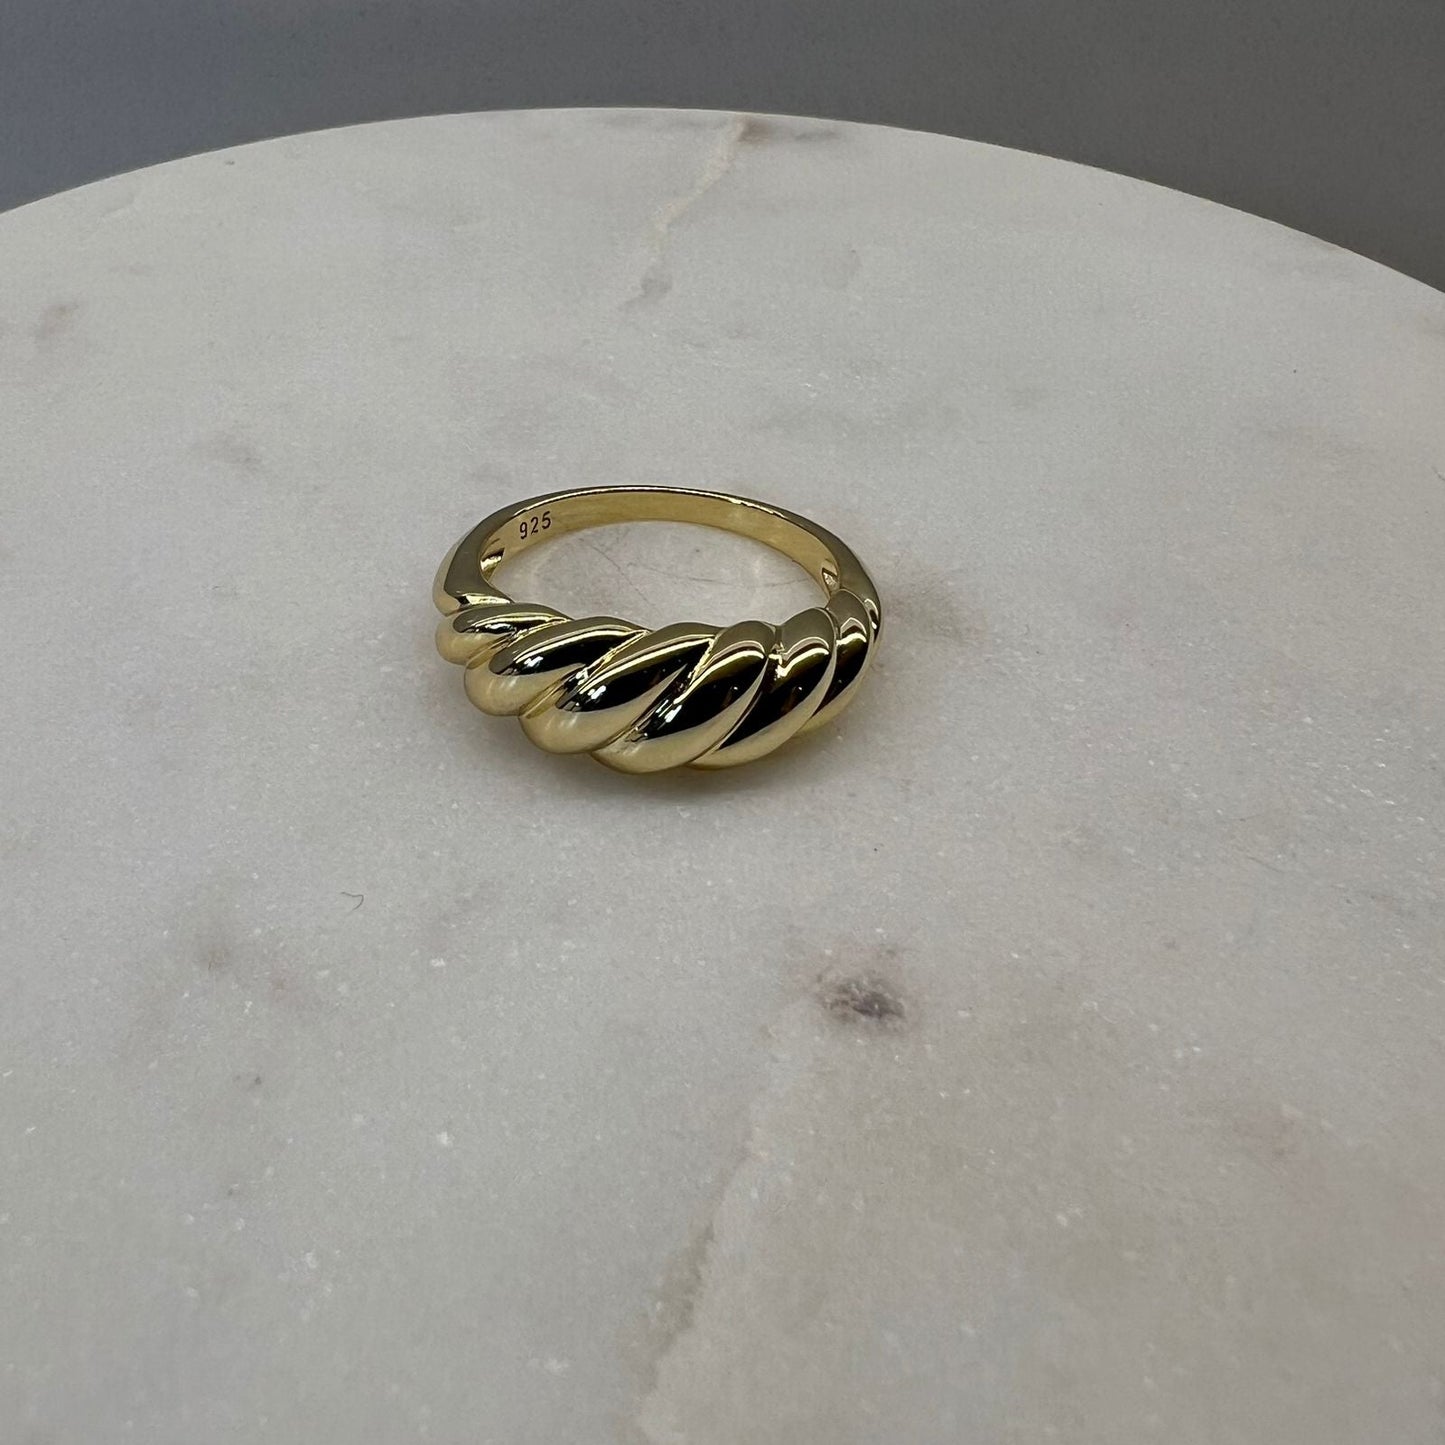 Fine and Yonder Rings Single Size Croissant Ring